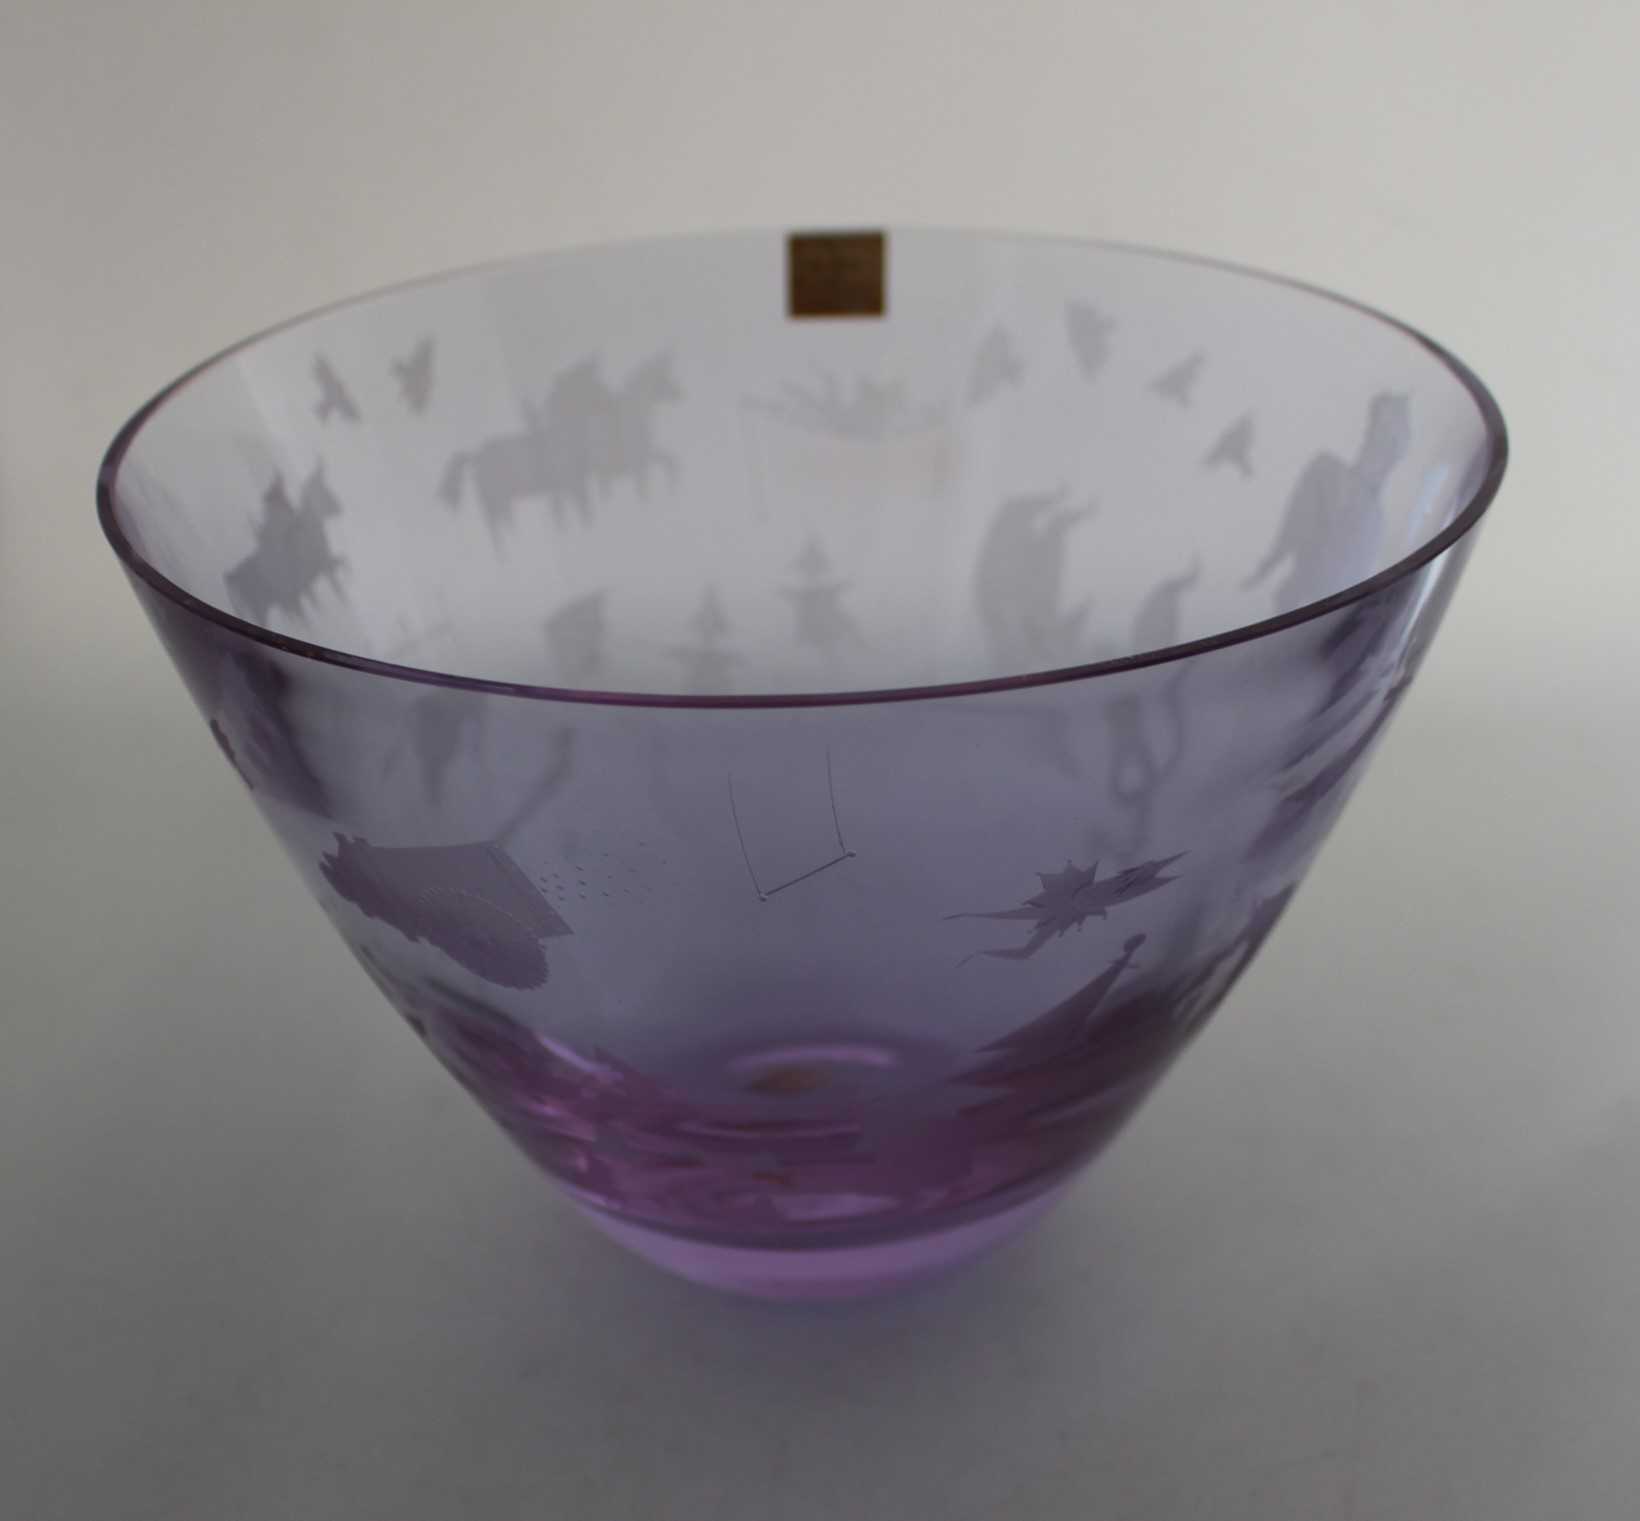 A Caithness pale amethyst glass "Circus" bowl with engraved decoration, etched signature C.B.